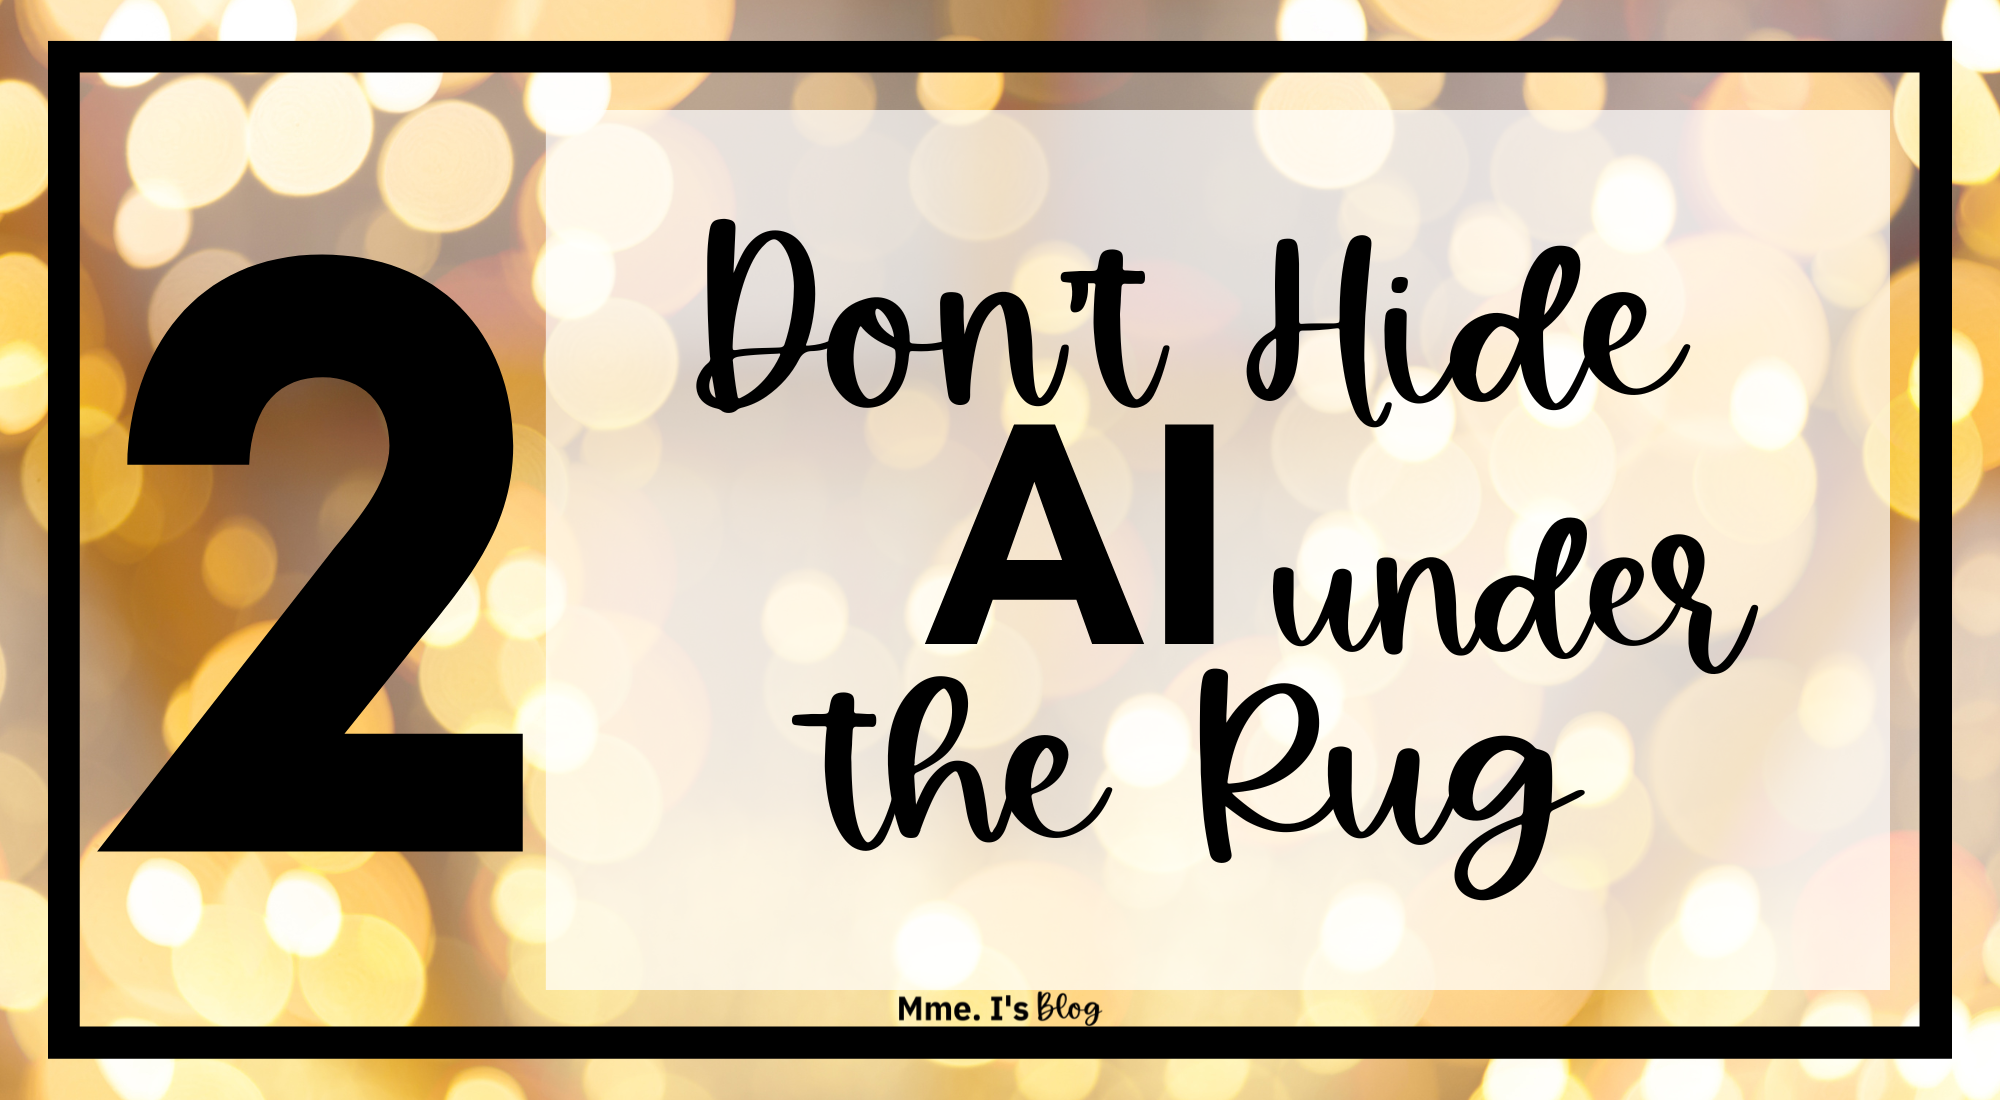 Don’t Hide AI under the Rug